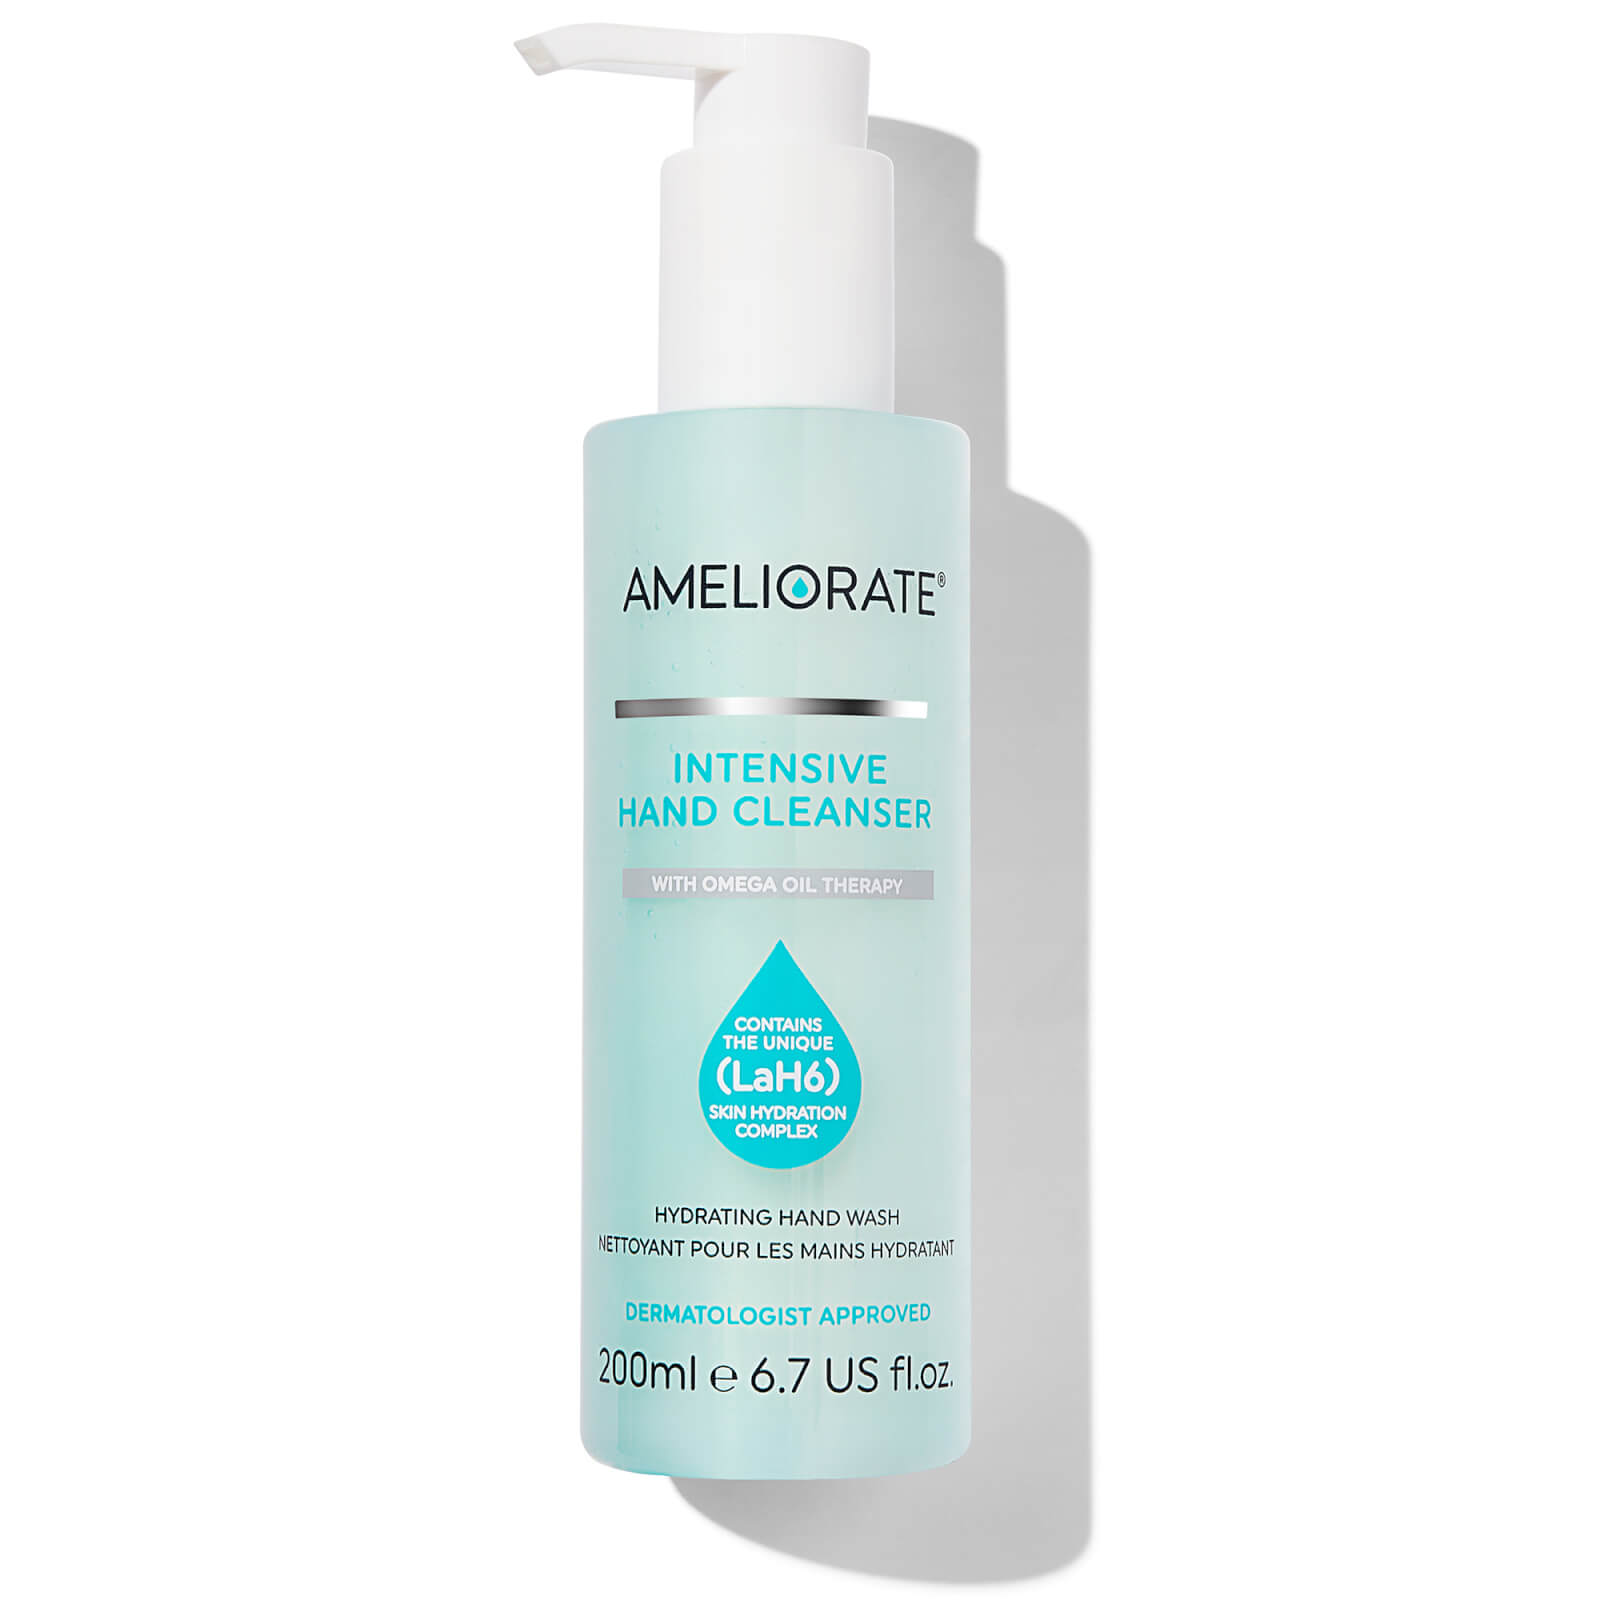 Image of AMELIORATE Intensive Hand Cleanser